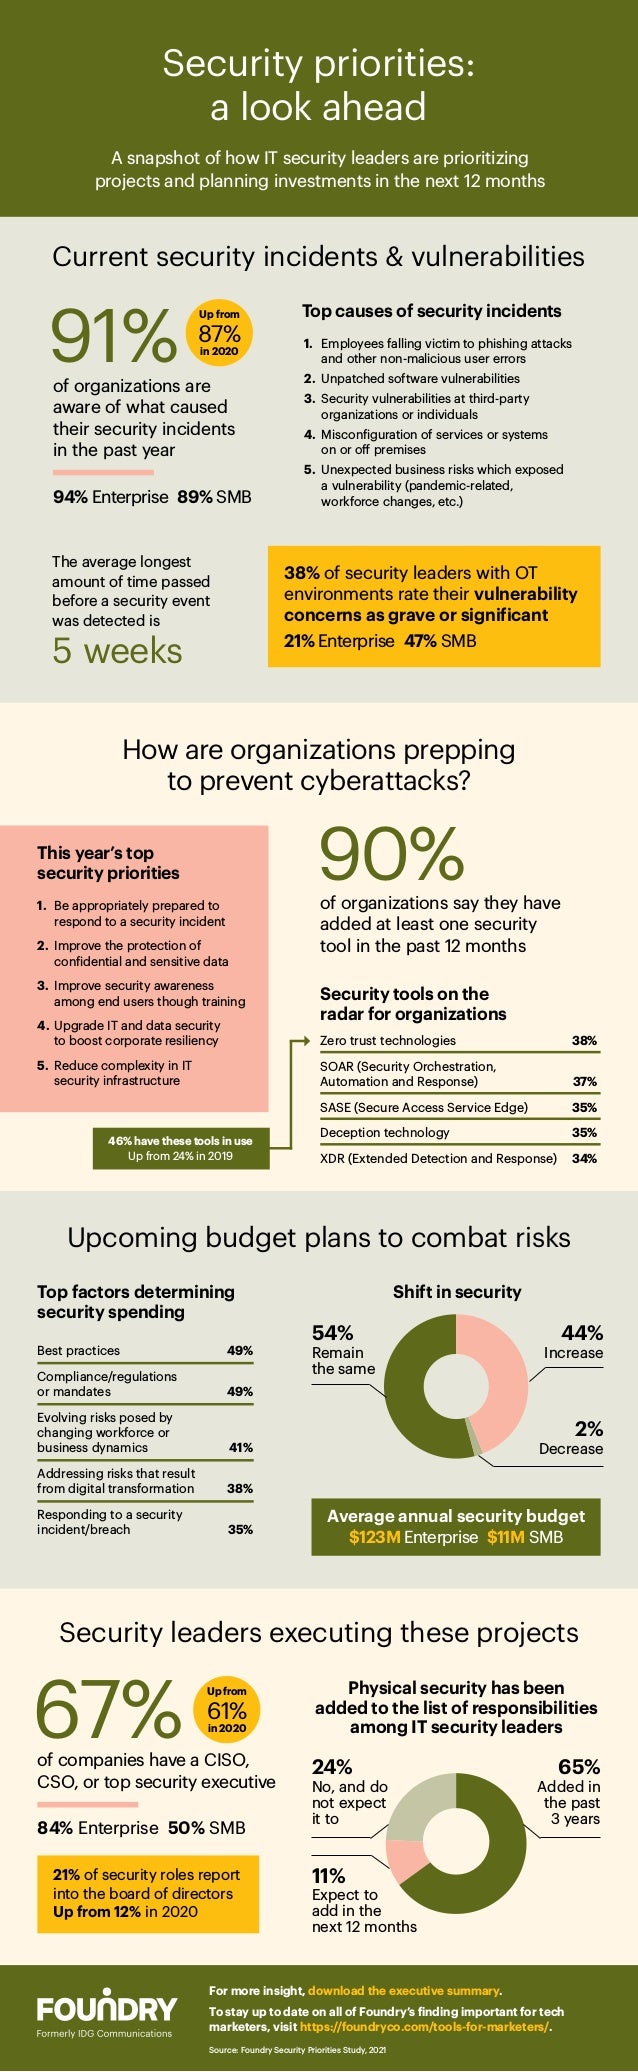 Security priorities:
a look ahead
How are organizations prepping
to prevent cyberattacks?
Upcoming budget plans to combat risks
A snapshot of how IT security leaders are prioritizing
projects and planning investments in the next 12 months
Current security incidents & vulnerabilities
For more insight, download the executive summary.
To stay up to date on all of Foundry’s finding important for tech
marketers, visit https://foundryco.com/tools-for-marketers/.
Security leaders executing these projects
Top causes of security incidents
1.	 Employees falling victim to phishing attacks
	 and other non-malicious user errors
2.	 Unpatched software vulnerabilities
3.	 Security vulnerabilities at third-party
	 organizations or individuals
4.	 Misconfiguration of services or systems
	 on or off premises
5.	 Unexpected business risks which exposed
	 a vulnerability (pandemic-related,
	 workforce changes, etc.)
The average longest
amount of time passed
before a security event
was detected is
5 weeks
This year’s top
security priorities
1.	 Be appropriately prepared to
respond to a security incident
2.	 Improve the protection of
confidential and sensitive data
3.	 Improve security awareness
among end users though training
4.	 Upgrade IT and data security
to boost corporate resiliency
5.	 Reduce complexity in IT
security infrastructure
Best practices 	 49%
Compliance/regulations
or mandates 	 49%
Evolving risks posed by
changing workforce or
business dynamics 	 41%
Addressing risks that result
from digital transformation	 38%
Responding to a security
incident/breach 	 35%
Top factors determining
security spending
of companies have a CISO,
CSO, or top security executive
84% Enterprise 50% SMB
67%
21% of security roles report
into the board of directors
Up from 12% in 2020
Physical security has been
added to the list of responsibilities
among IT security leaders
65%
Added in
the past
3 years
46% have these tools in use
Up from 24% in 2019
of organizations are
aware of what caused
their security incidents
in the past year
91%
94% Enterprise 89% SMB
38% of security leaders with OT
environments rate their vulnerability
concerns as grave or significant
21% Enterprise 47% SMB
90%
of organizations say they have
added at least one security
tool in the past 12 months
Security tools on the
radar for organizations
Zero trust technologies	 38%
SOAR (Security Orchestration,
Automation and Response)	 37%
SASE (Secure Access Service Edge)	 35%
Deception technology	 35%
XDR (Extended Detection and Response)	 34%
Shift in security
Average annual security budget
$123M Enterprise $11M SMB
44%
Increase
54%
Remain
the same
2%
Decrease
Up from
87%
in 2020
Up from
61%
in 2020
24%
No, and do
not expect
it to
11%
Expect to
add in the
next 12 months
Source: Foundry Security Priorities Study, 2021
 